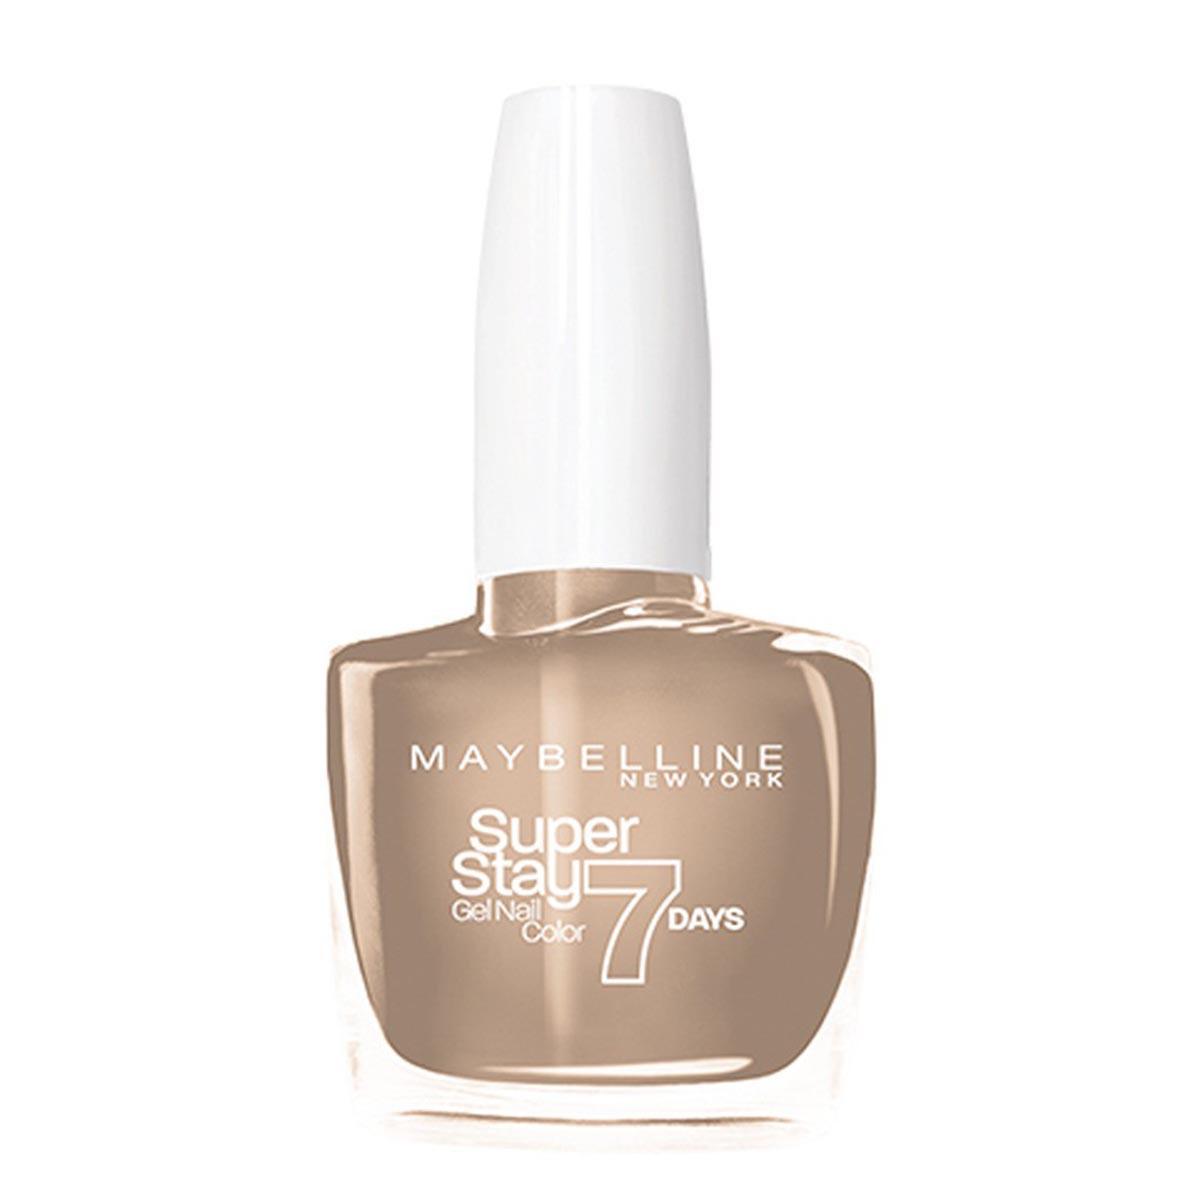 maybelline-superstay-gel-nail-color-7-days-076